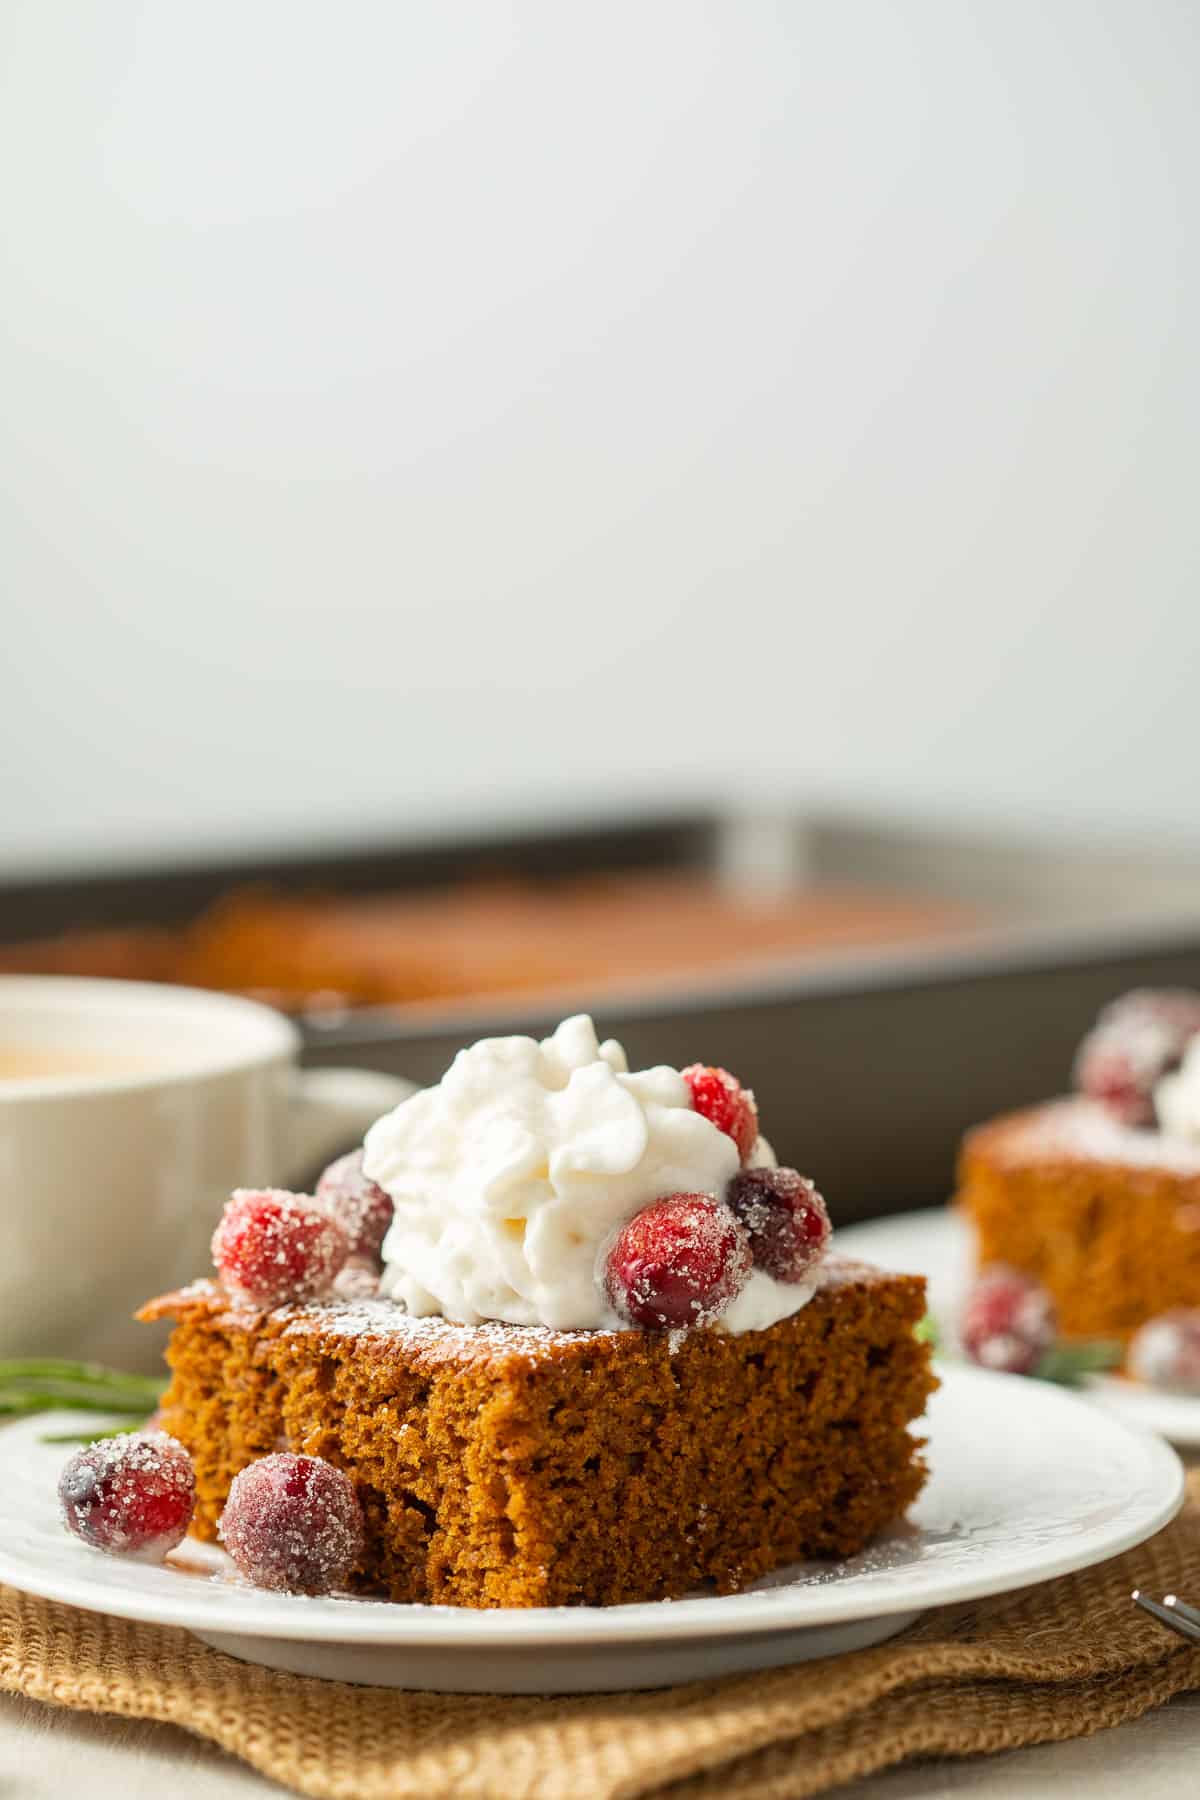 Slice of Vegan Gingerbread Cake topped with whipped cream, sugared cranberries and powdered sugar.